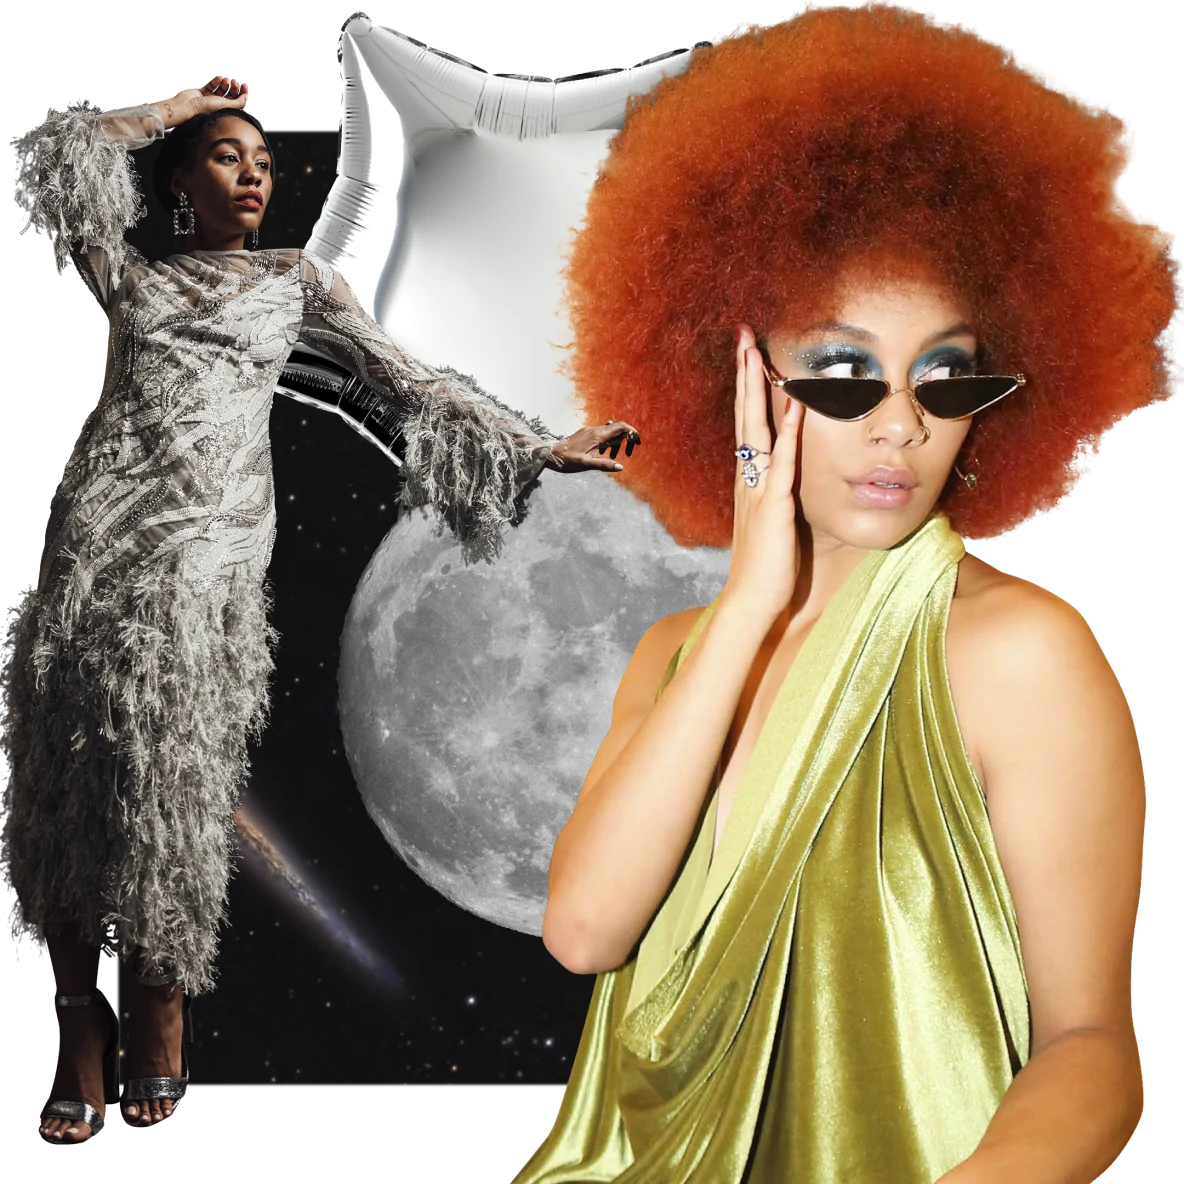 Black woman in shaggy gray dress leans against a full moon on the left. Black woman with red hair and green silky dress on right. Backdrop of outer space with a silver star balloon at top.